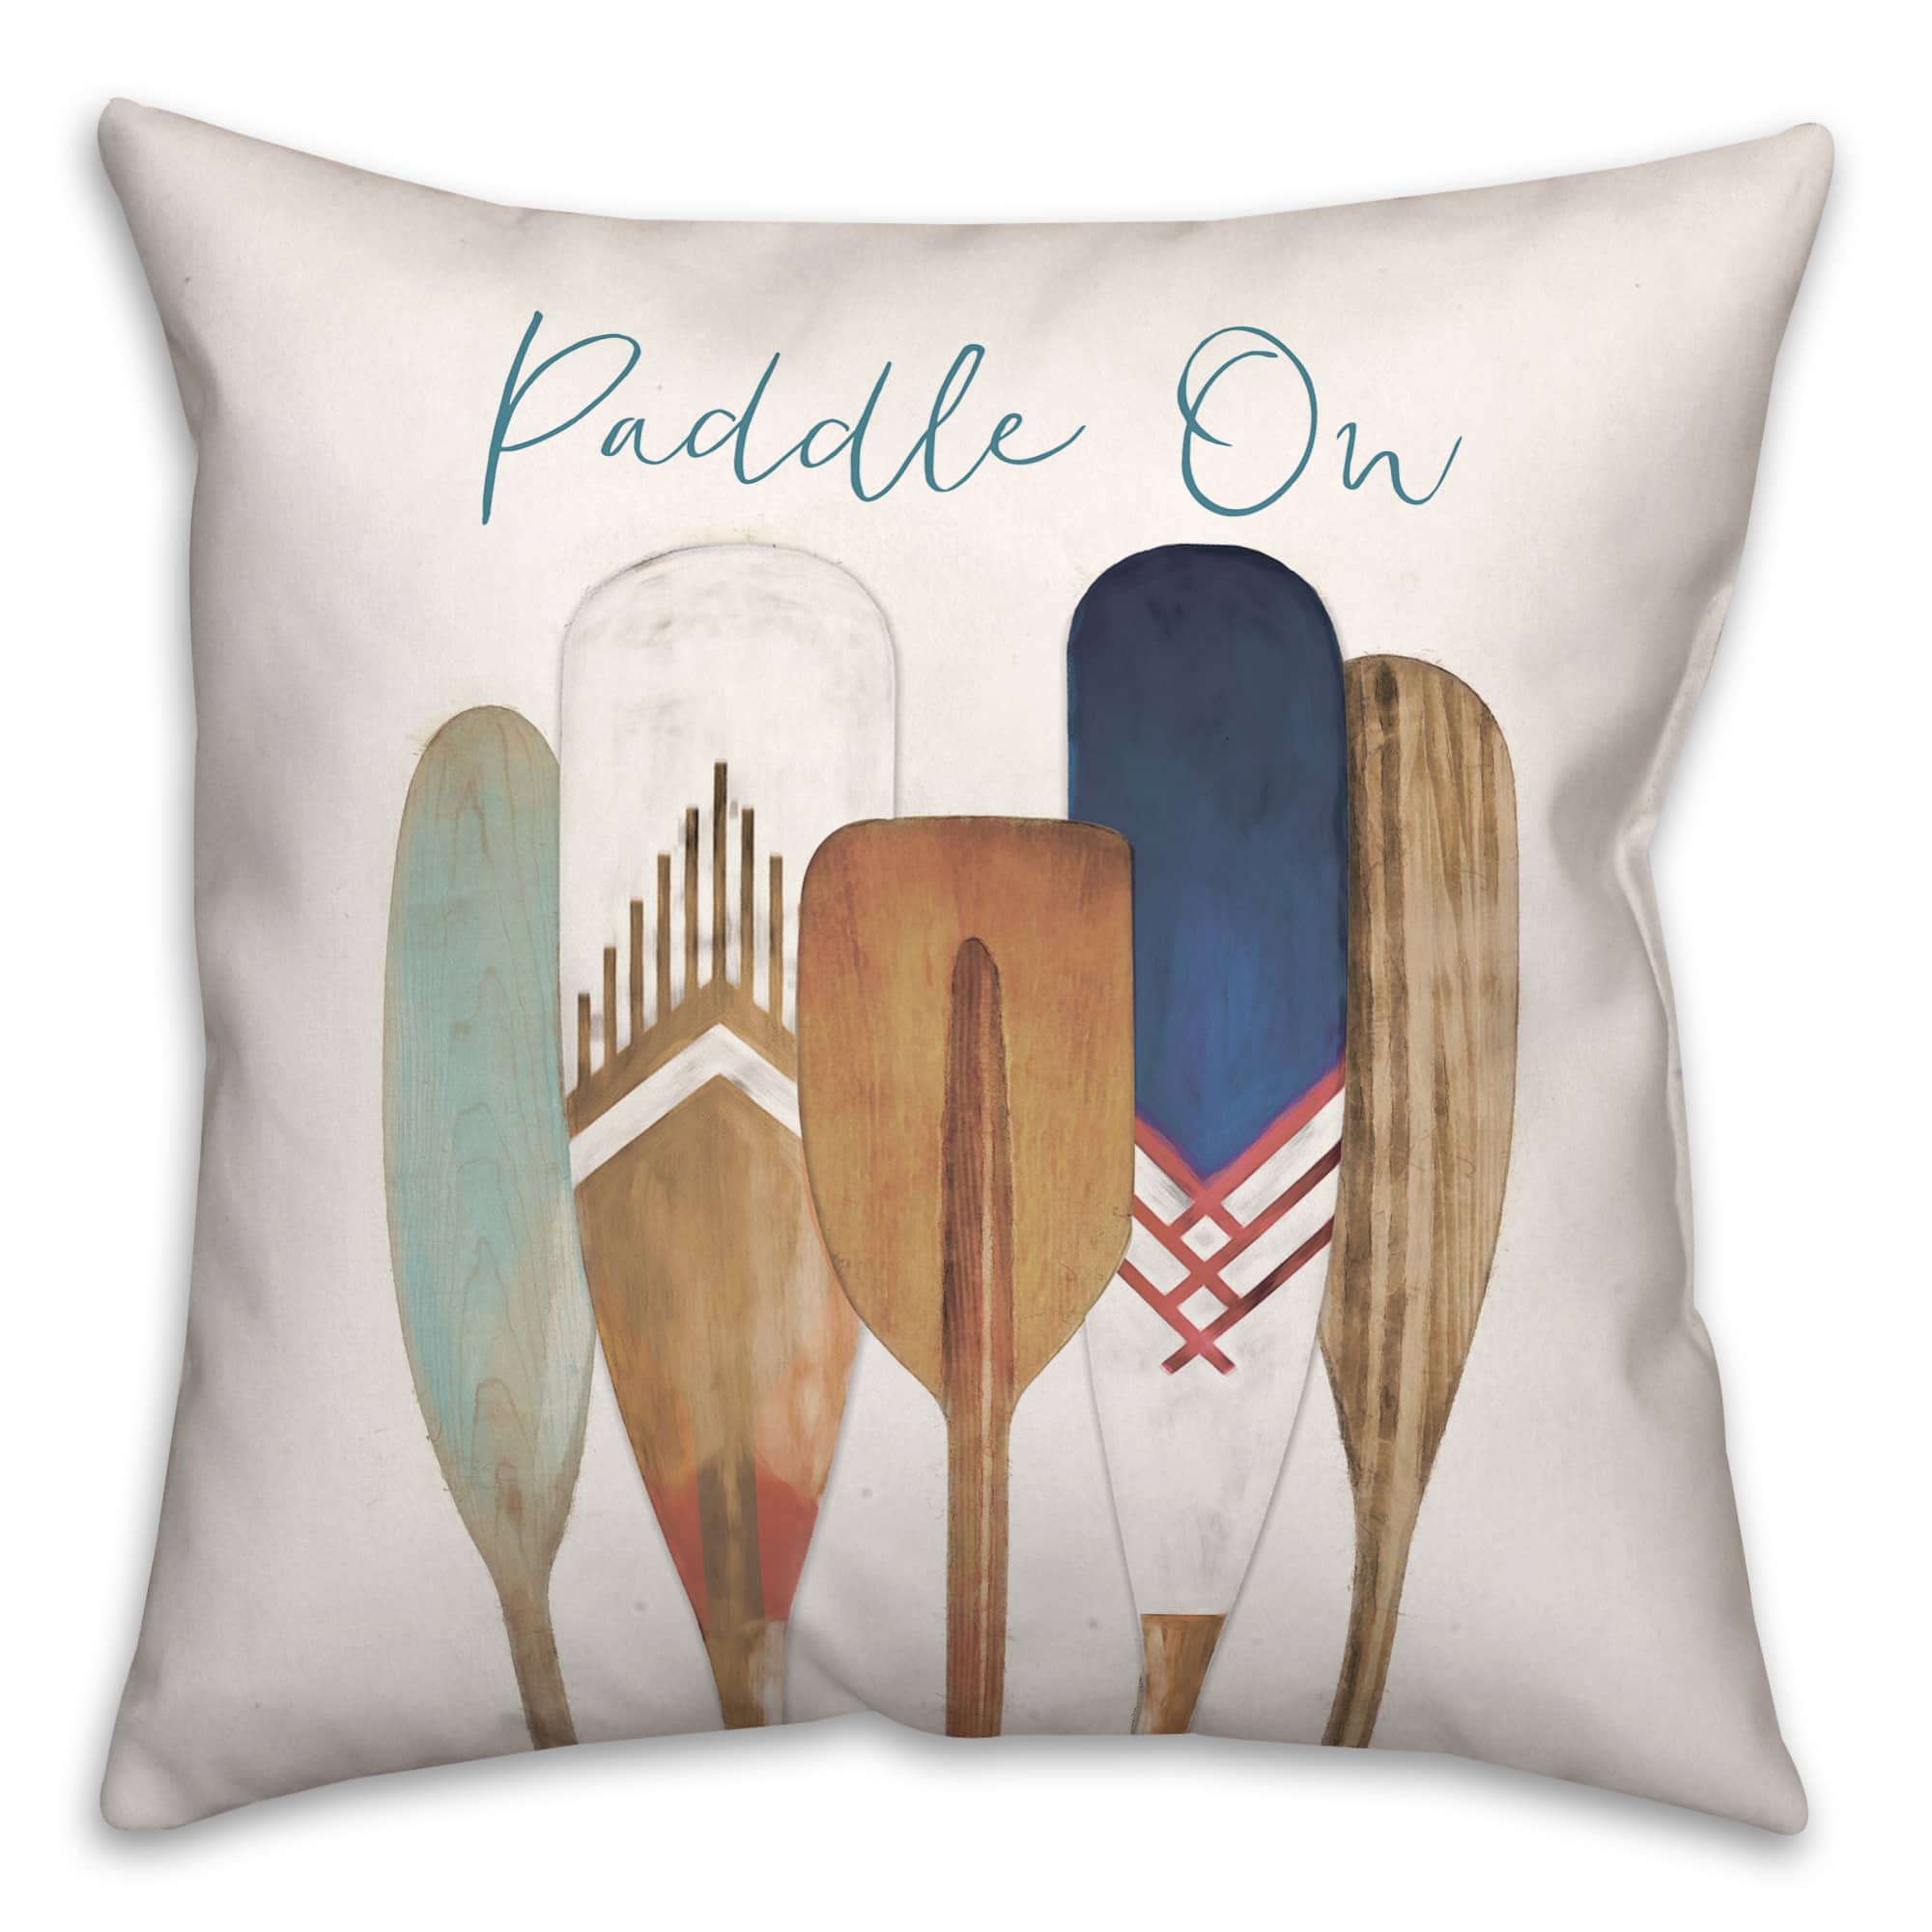 Paddle On Throw Pillow